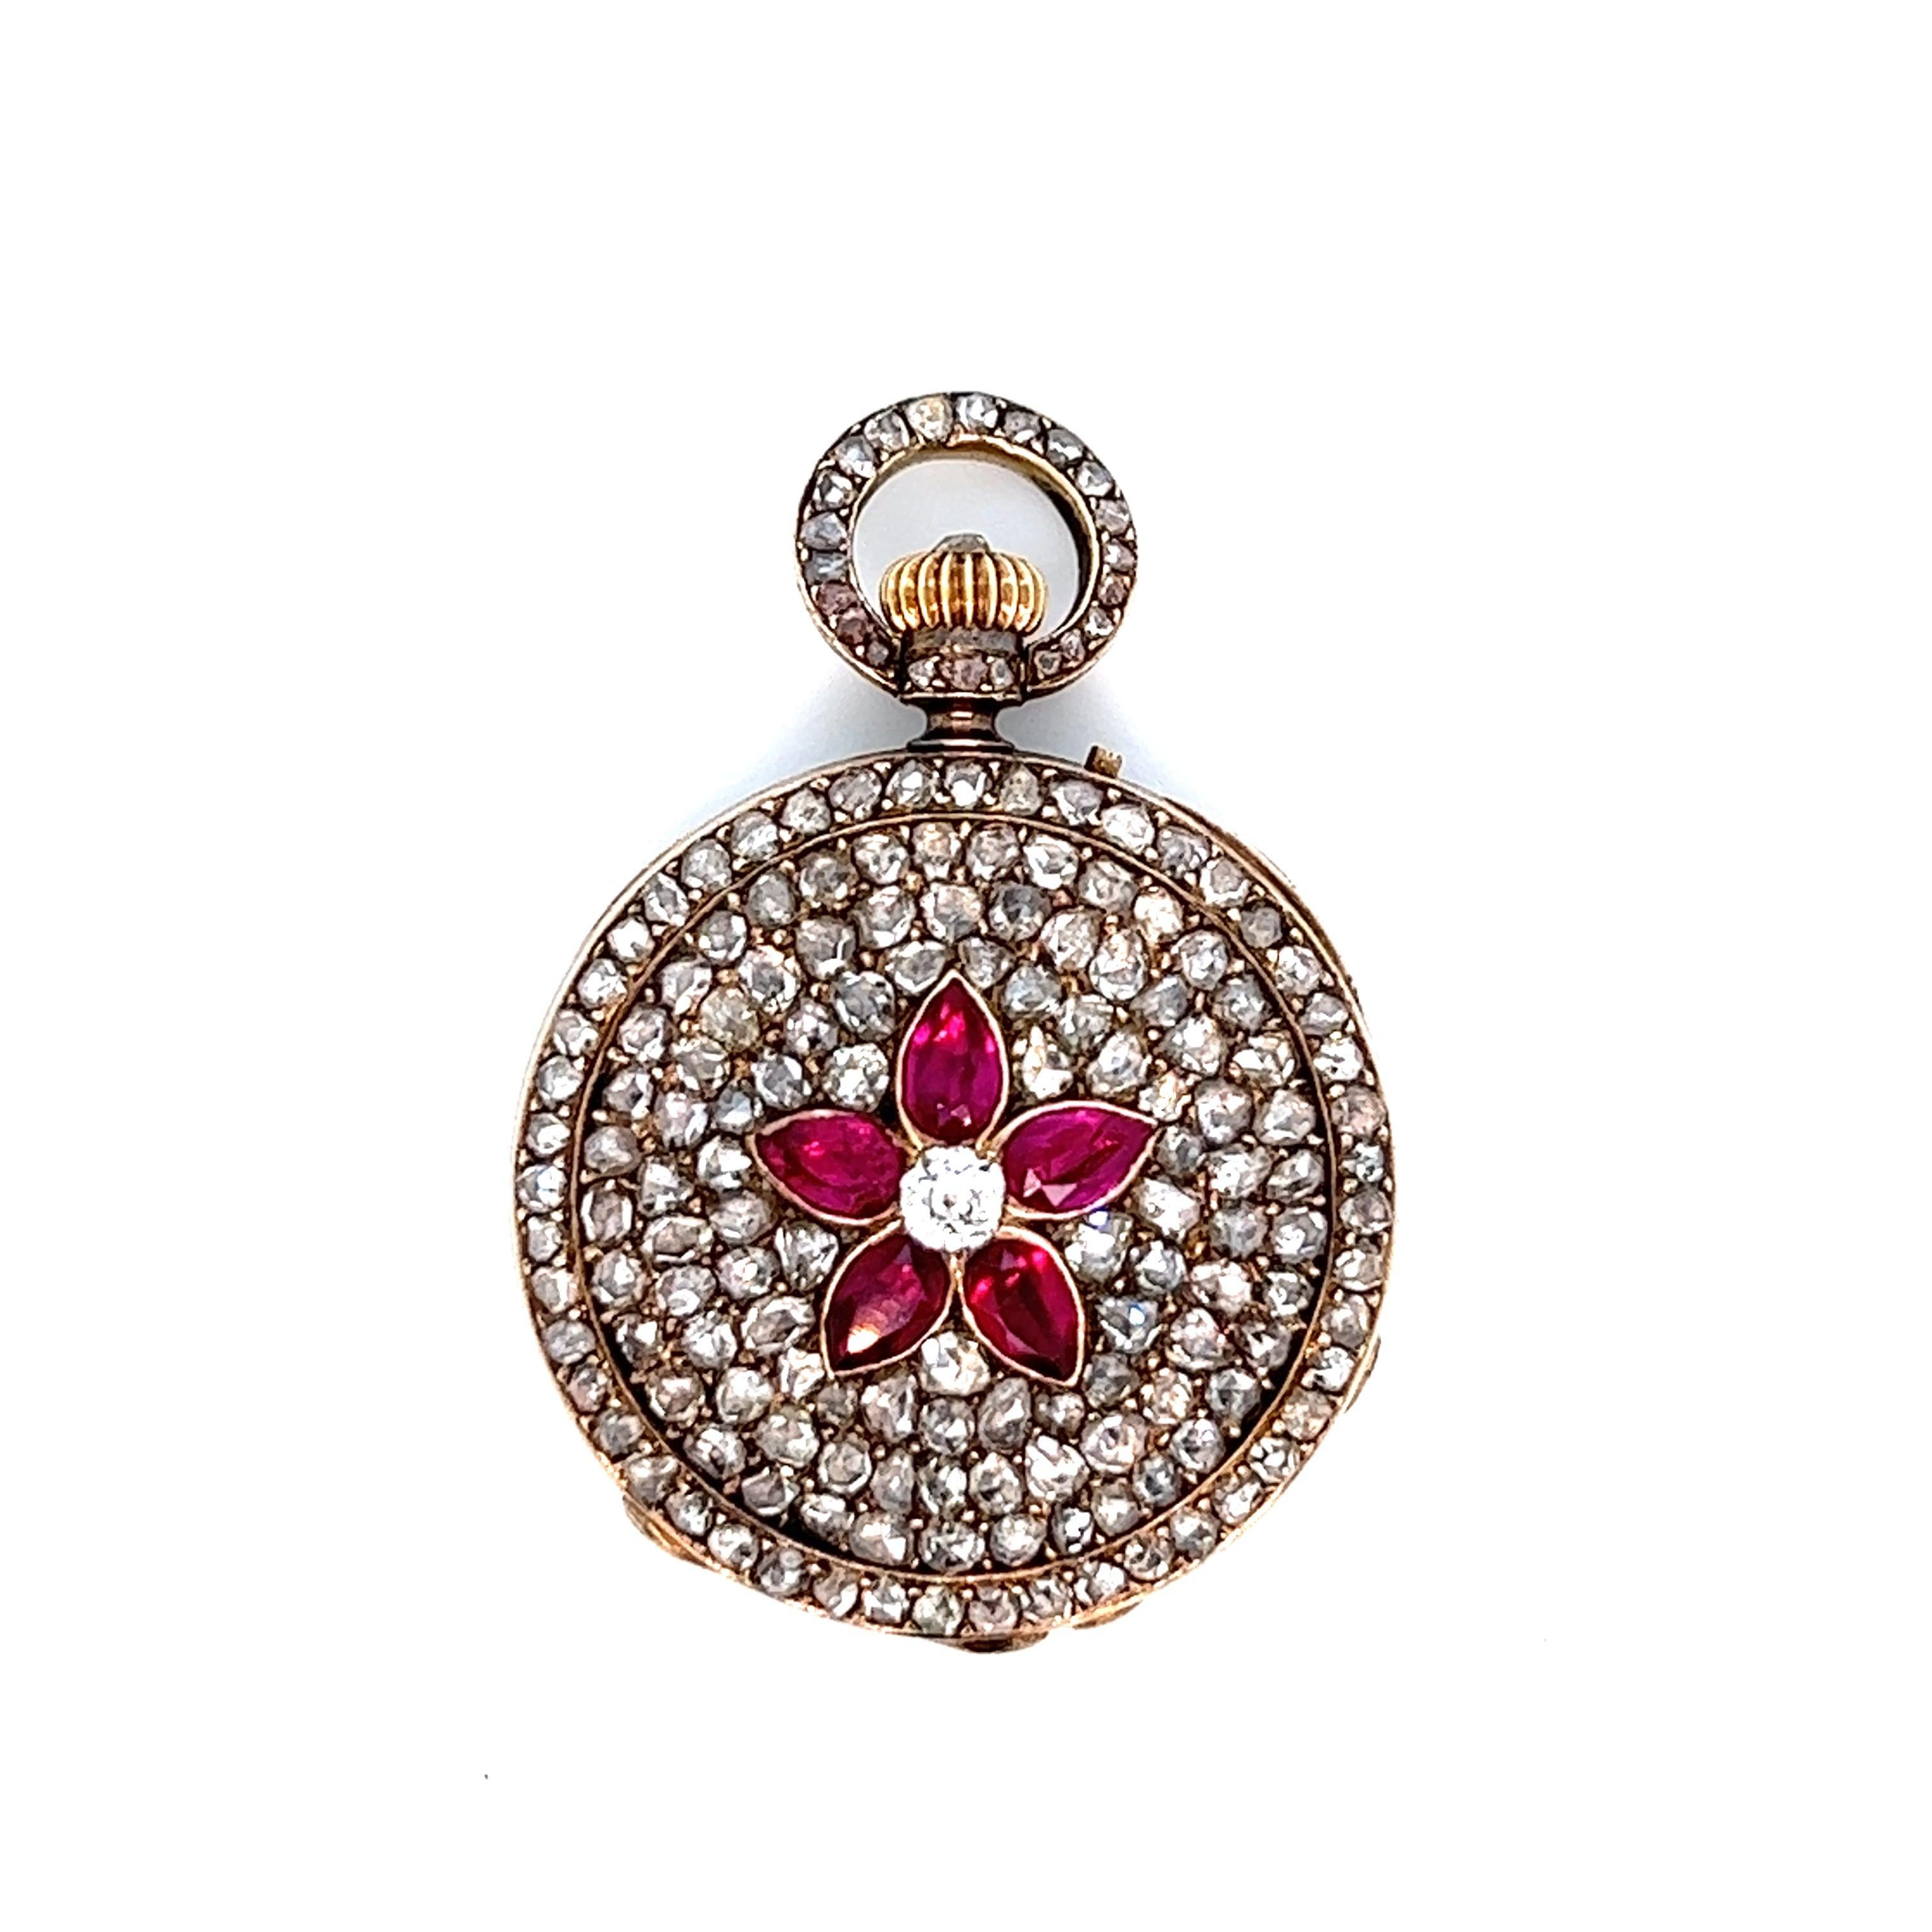 Antique circular pendant watch, circa 1880s

Tear drop-shaped rubies surrounded by rose-cut diamonds; center stone is a diamond of approximately 0.10 carat

Marked: Geneve, No. 86891 

Dimensions: width 1 inch, length 1 inch
Total weight: 22.8 grams